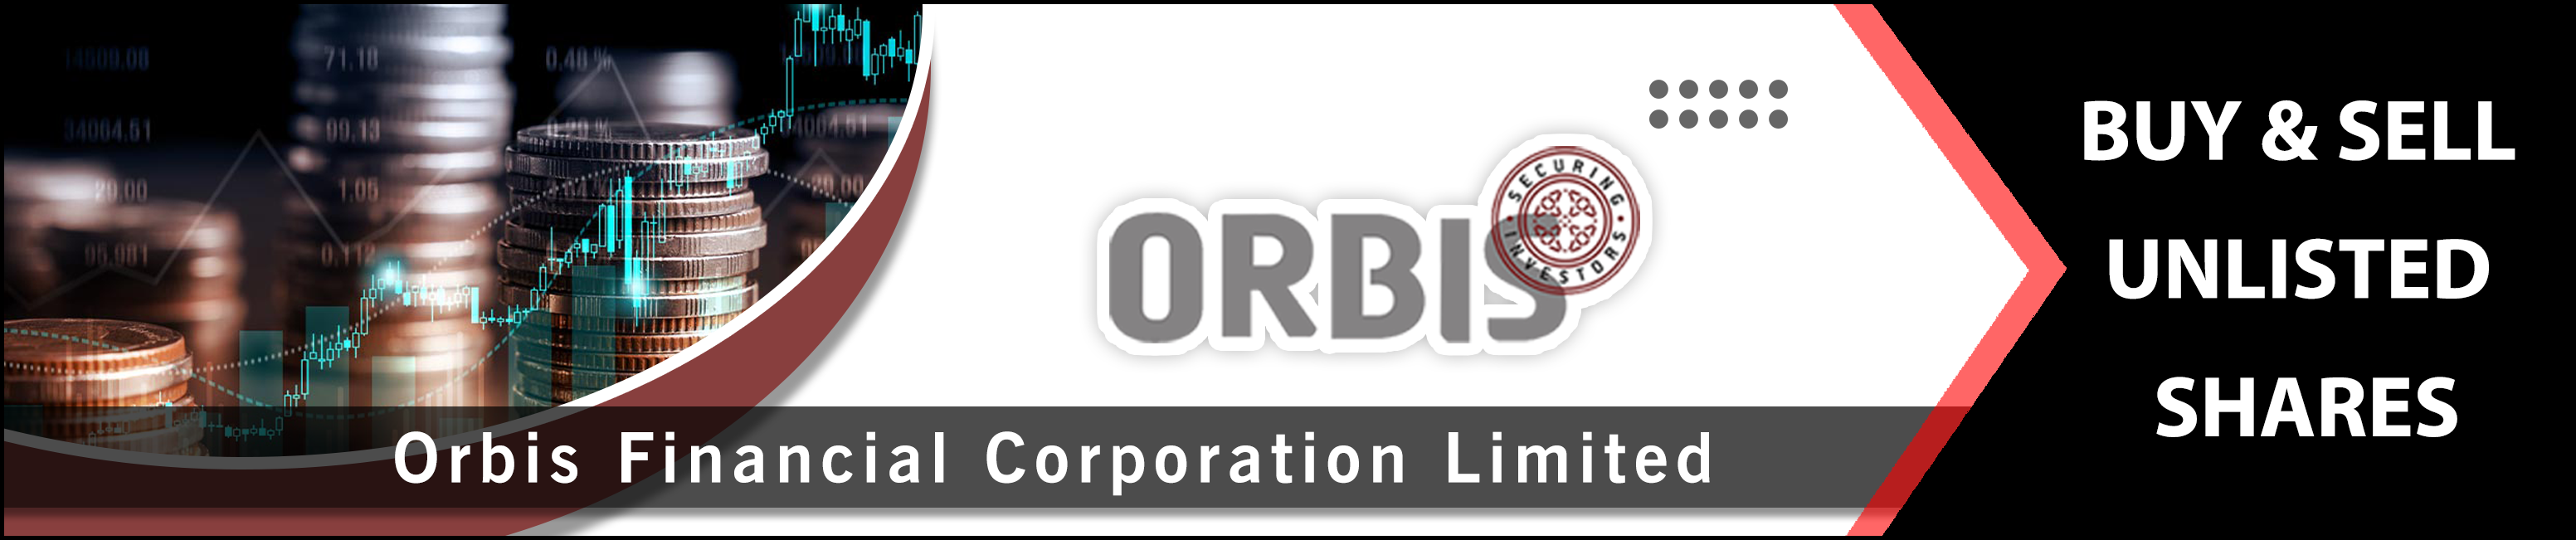 Orbis Financial Corporation Limited